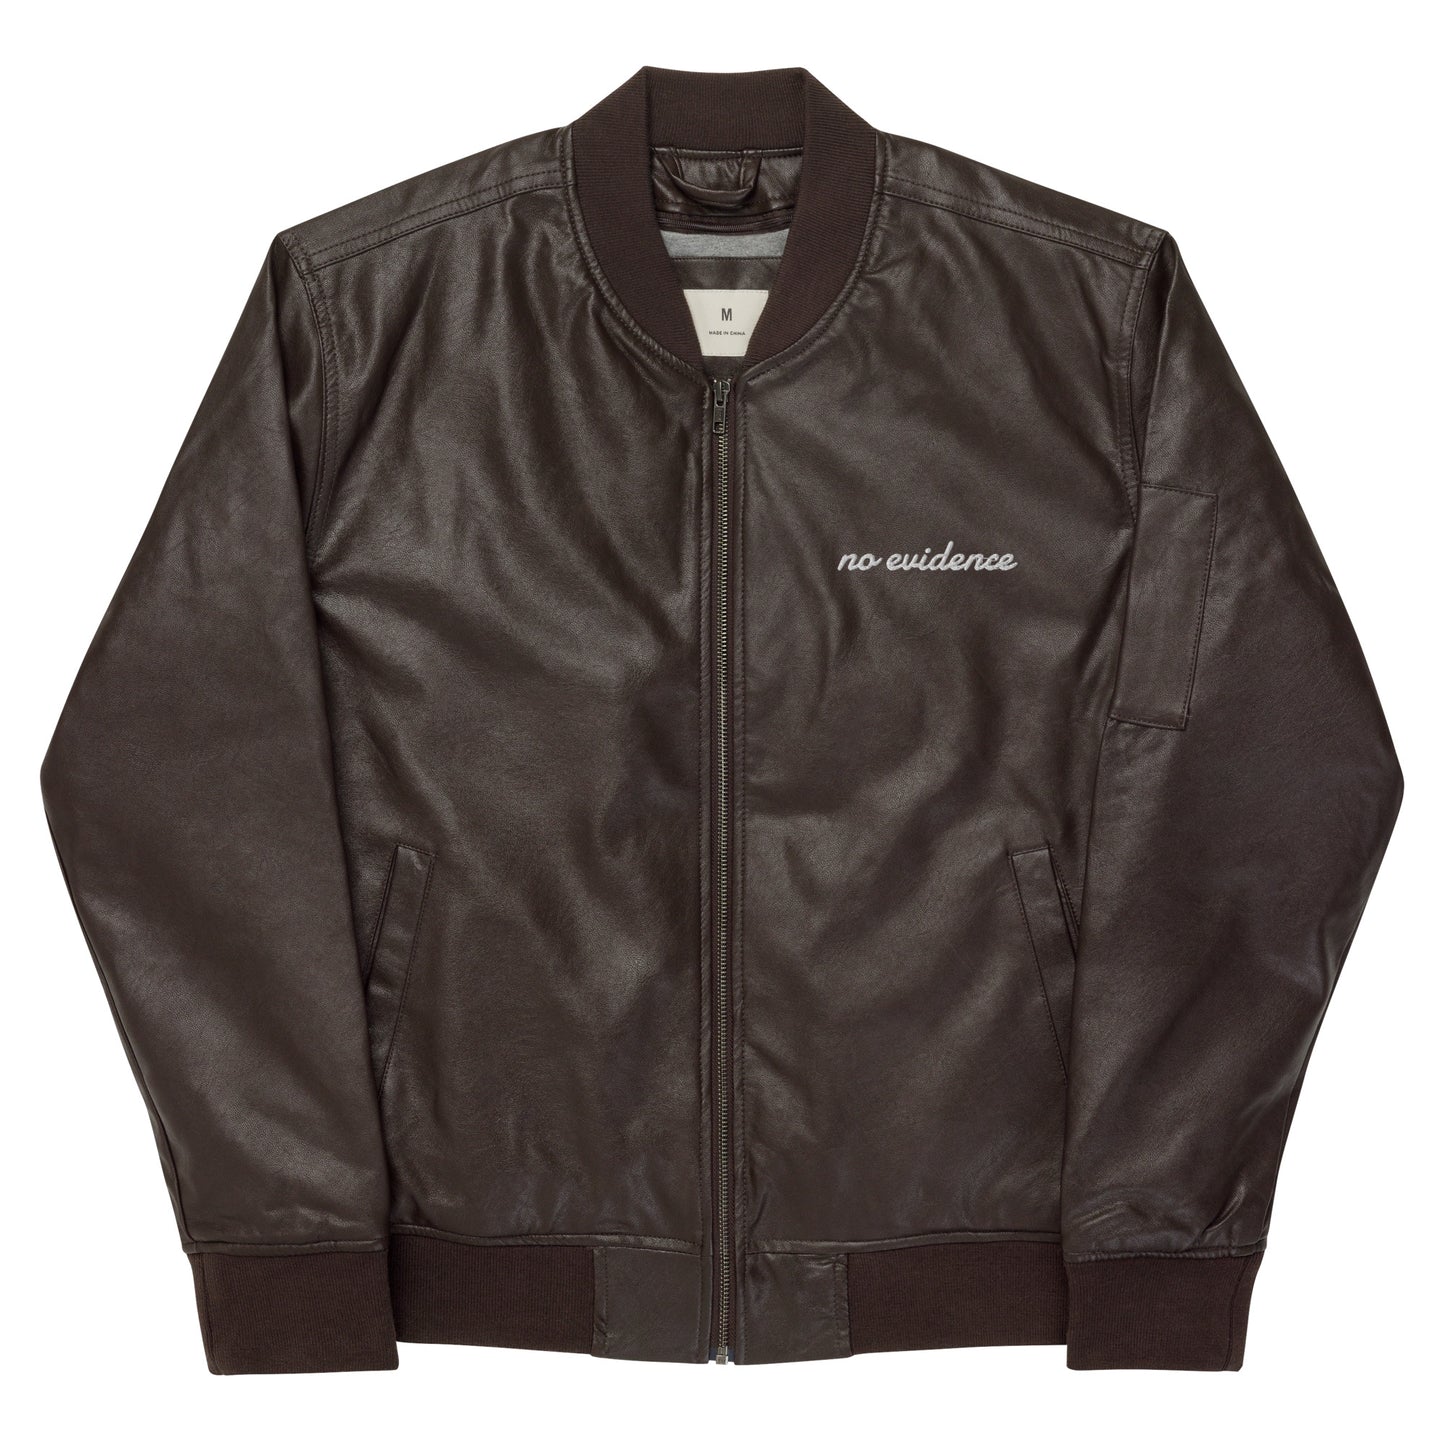 Leather Bomber Jacket embroidered